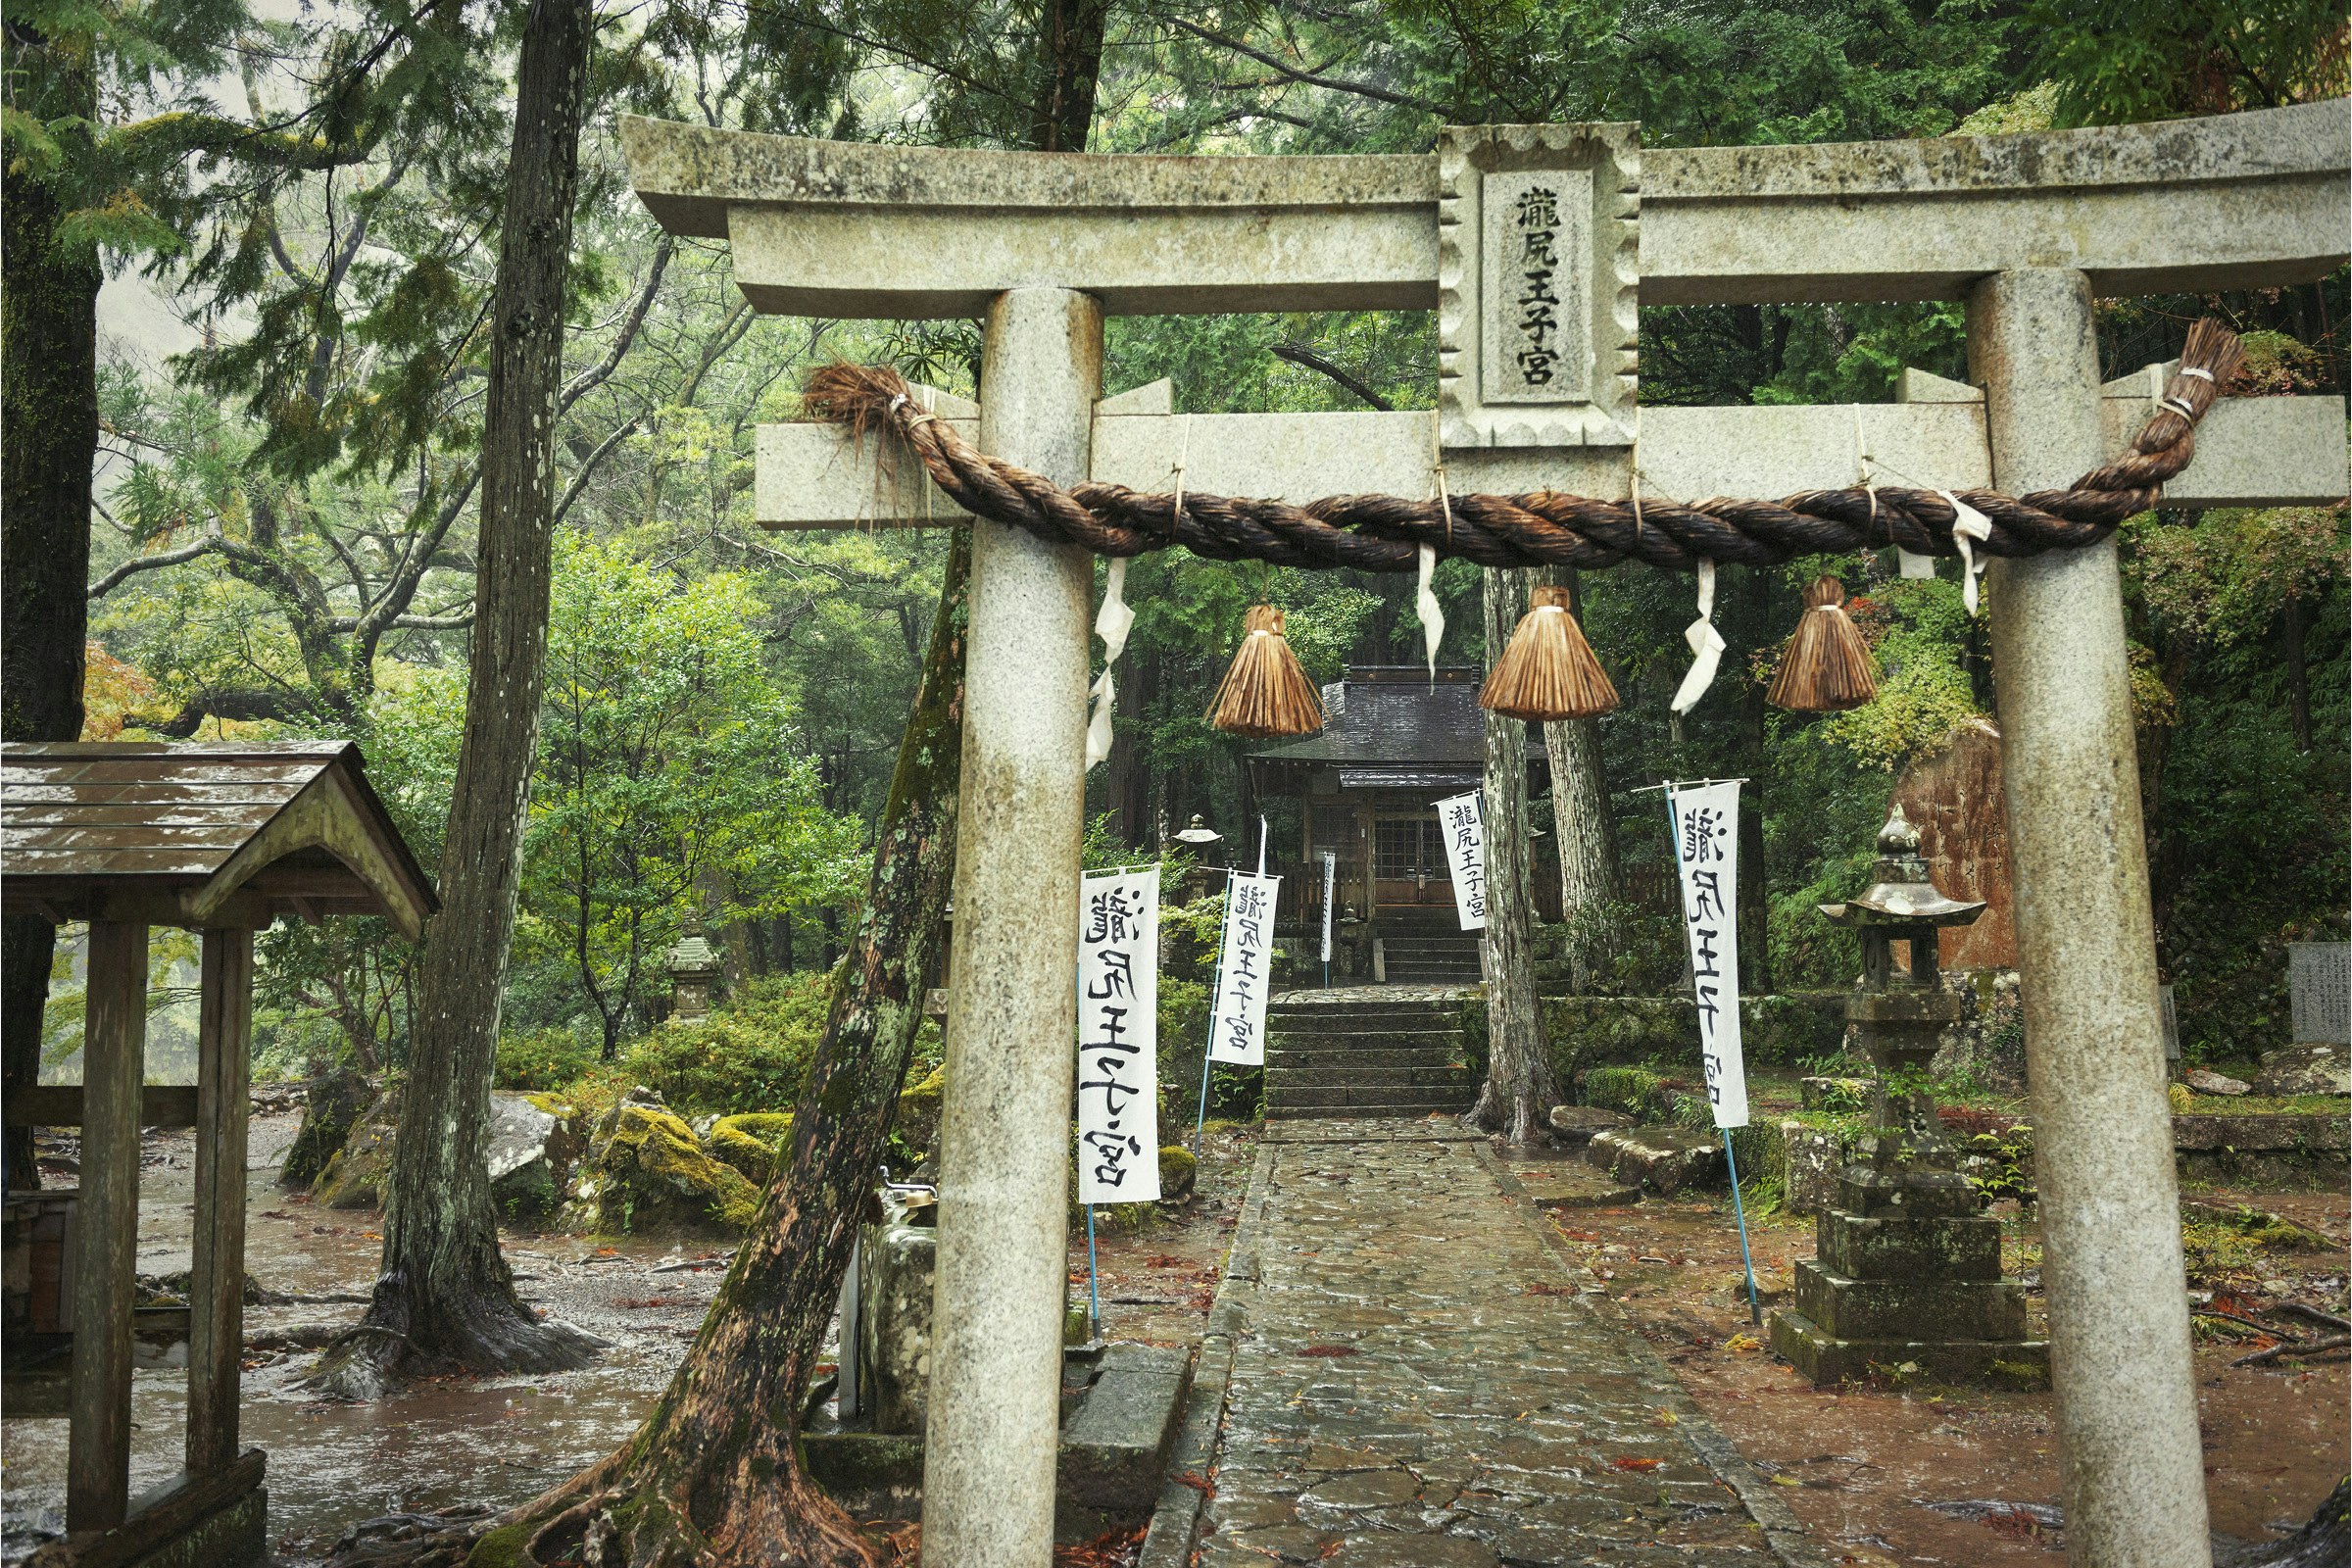 A shimenawa (rice straw rope) hangs at the shrine's entrance gate